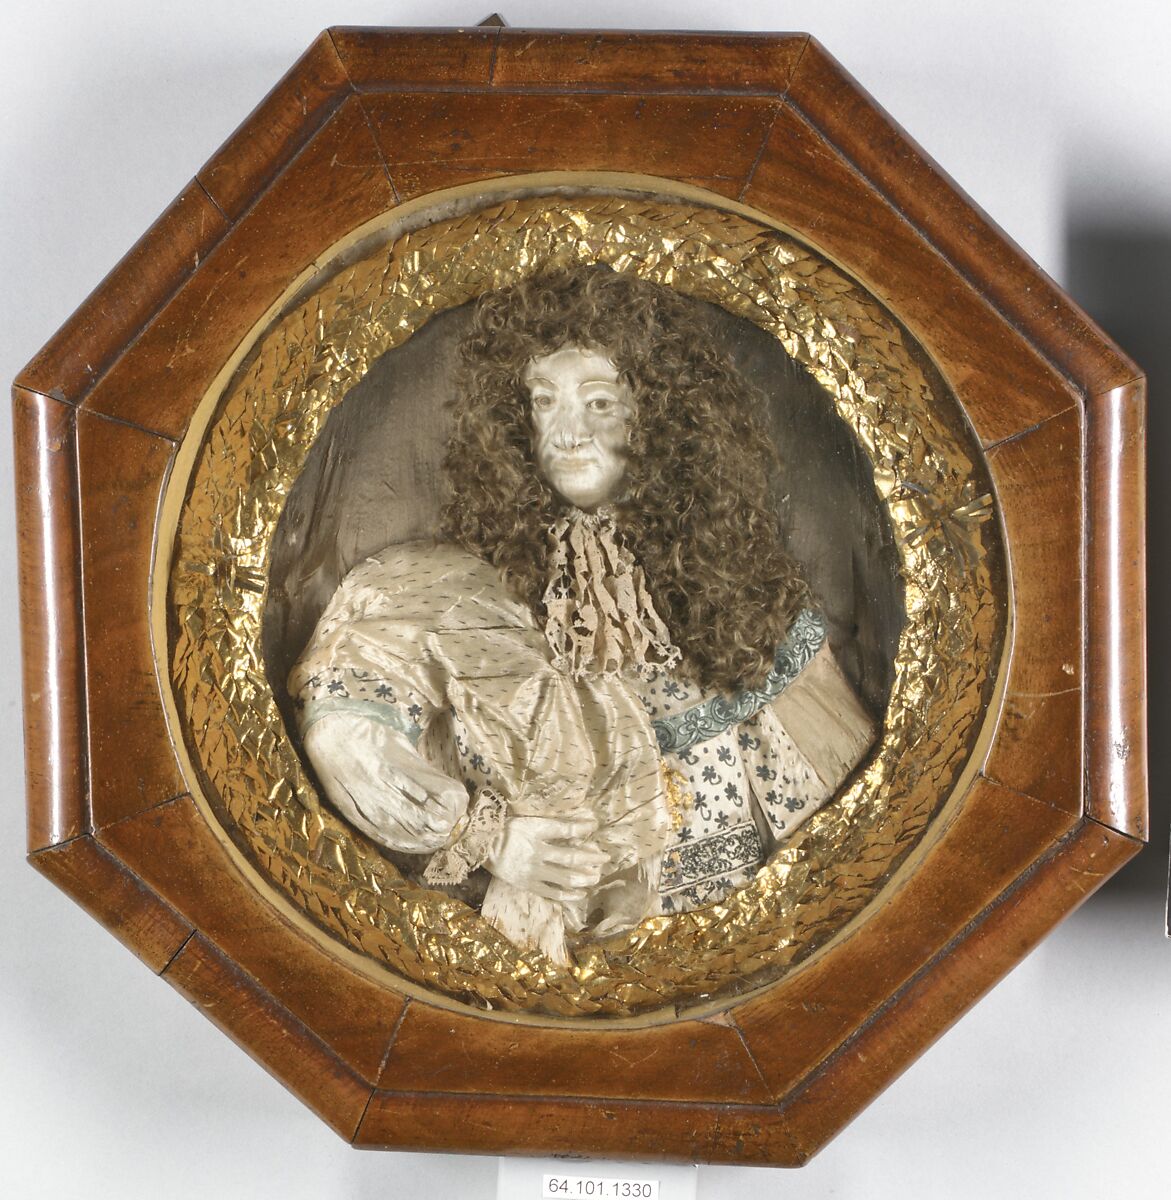 Portrait of Charles II in raised work embroidery, After a painting by John Baptist Gaspars (Flemish, Antwerp ca. 1620–1691 London), Silk, lace, metal foil on silk, British 